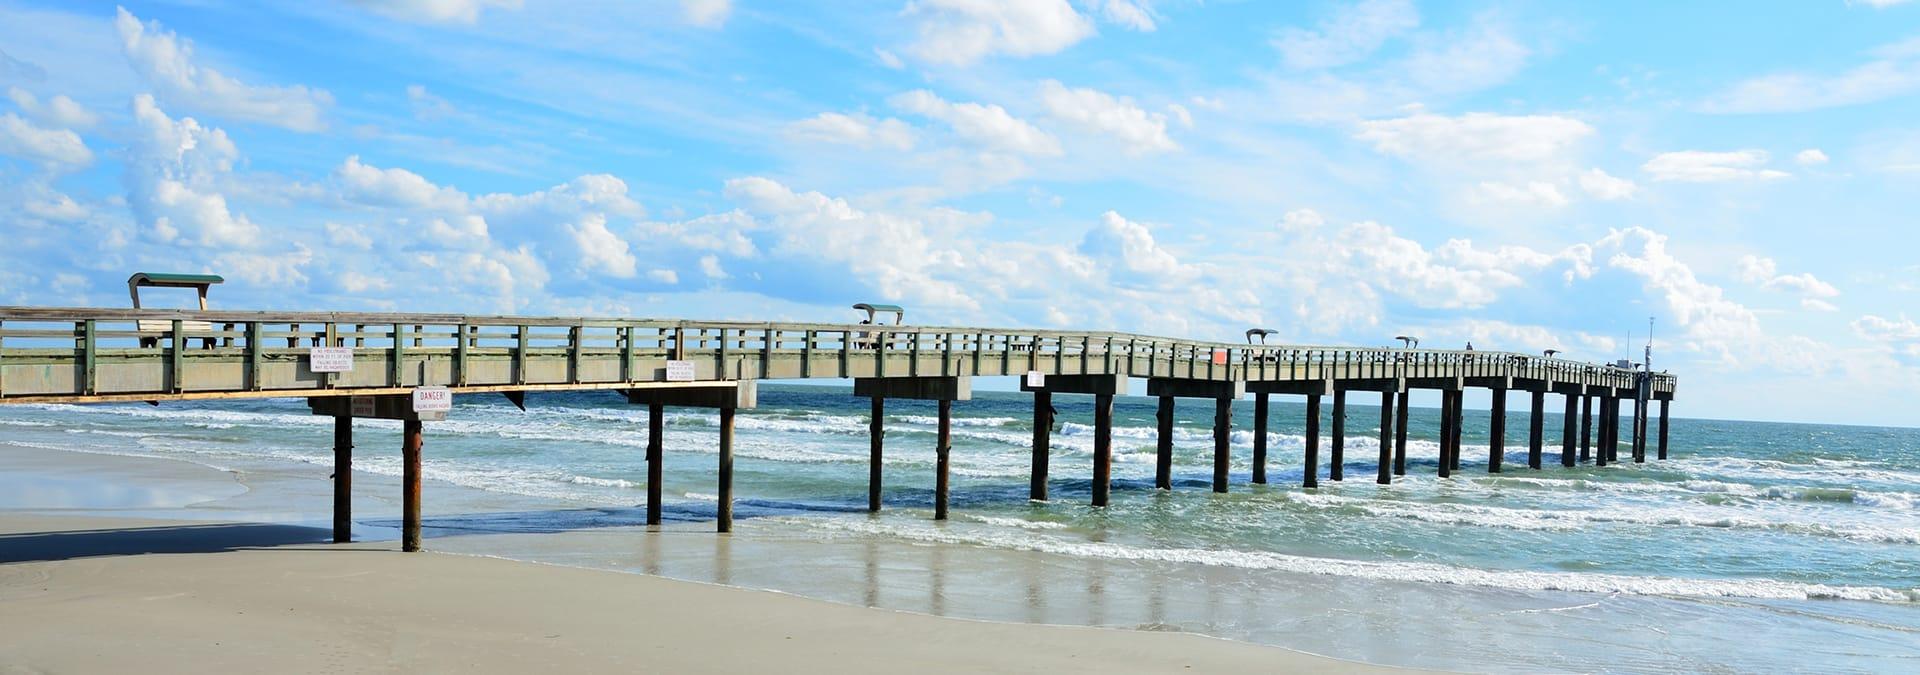 a view of a pier in st augustine beach florida